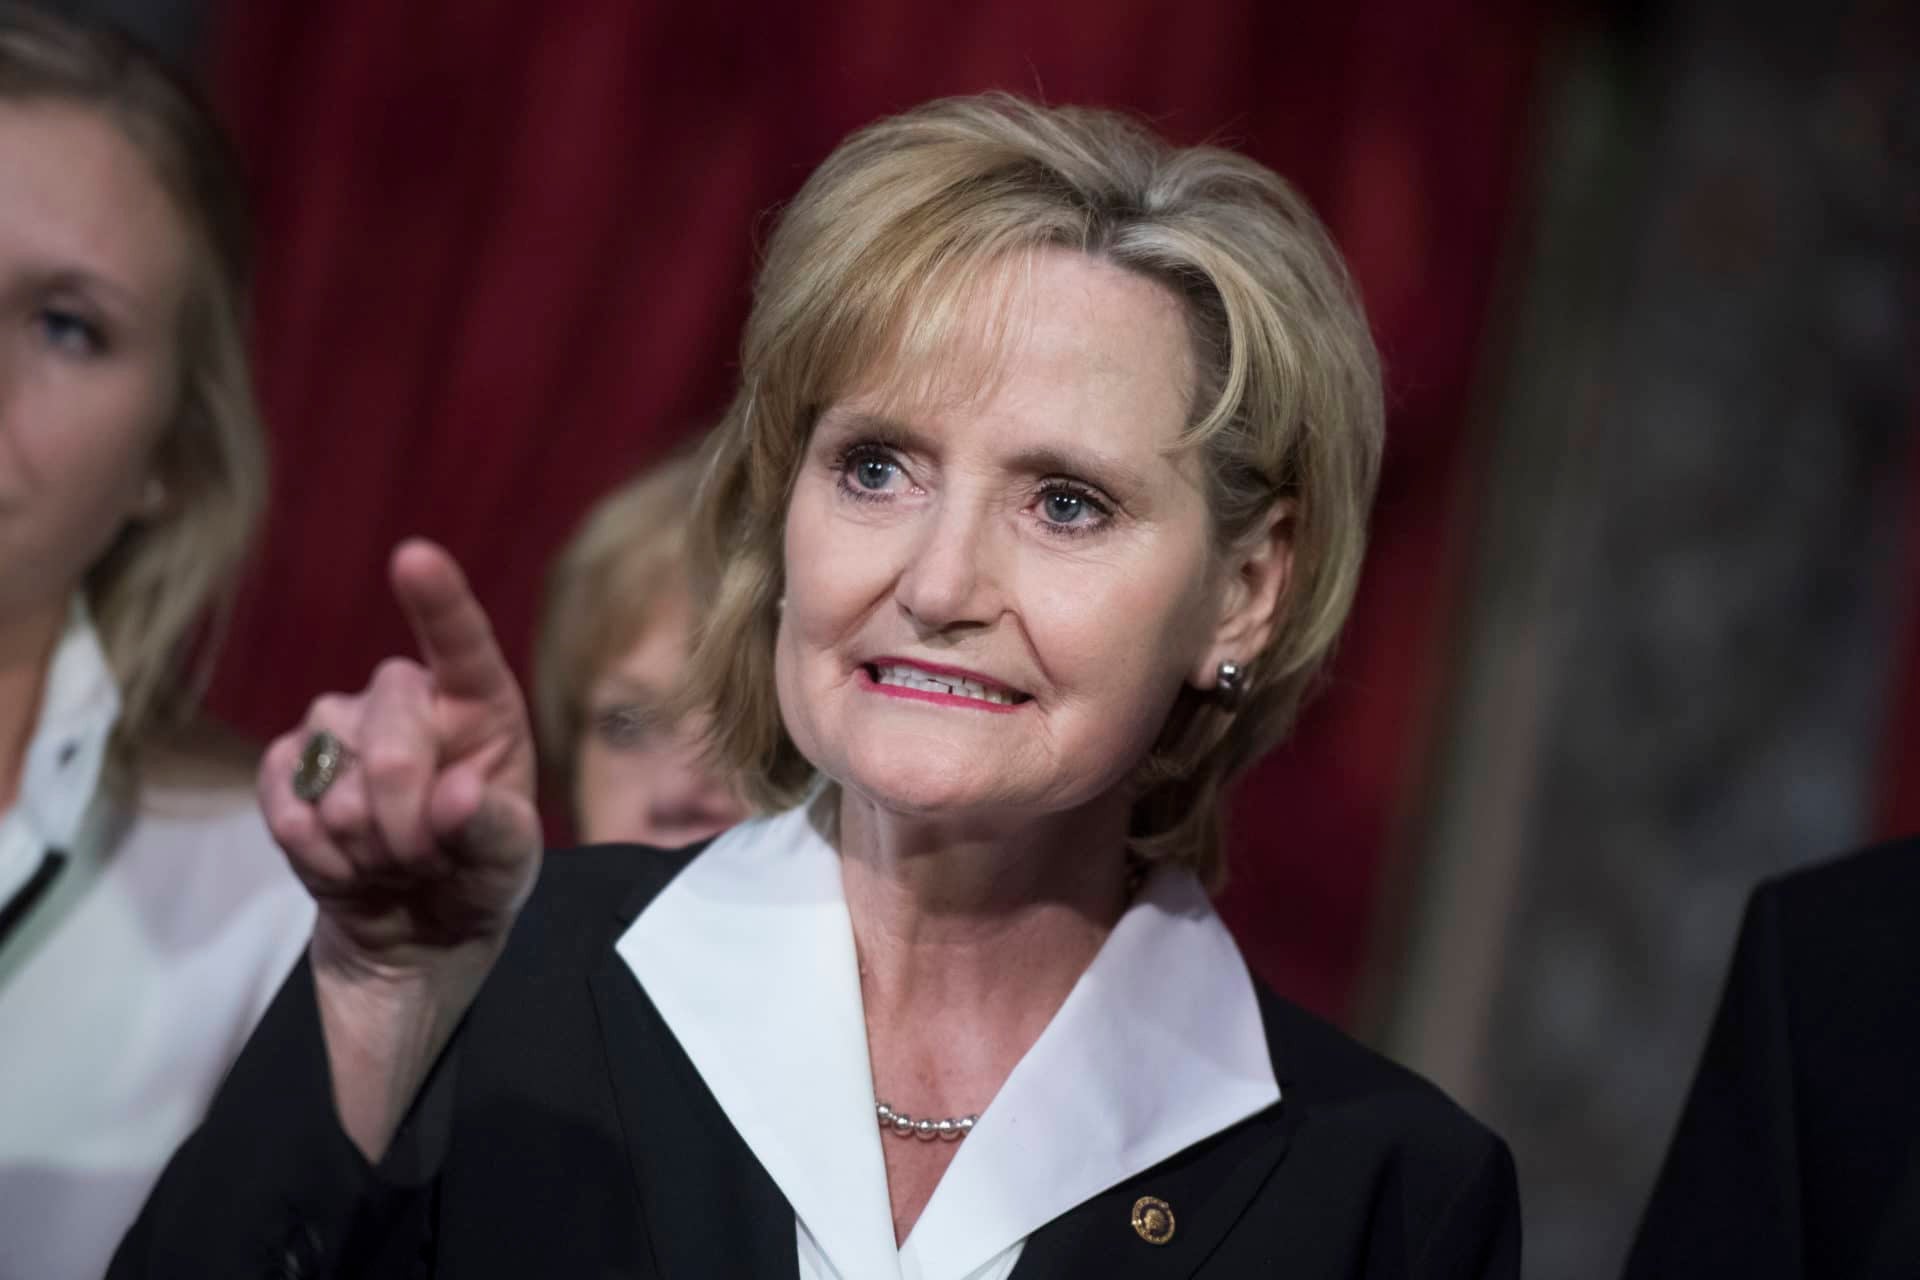 Mississippi Senator Apologizes To Those Offended by Her ‘Public Hanging’ Statement